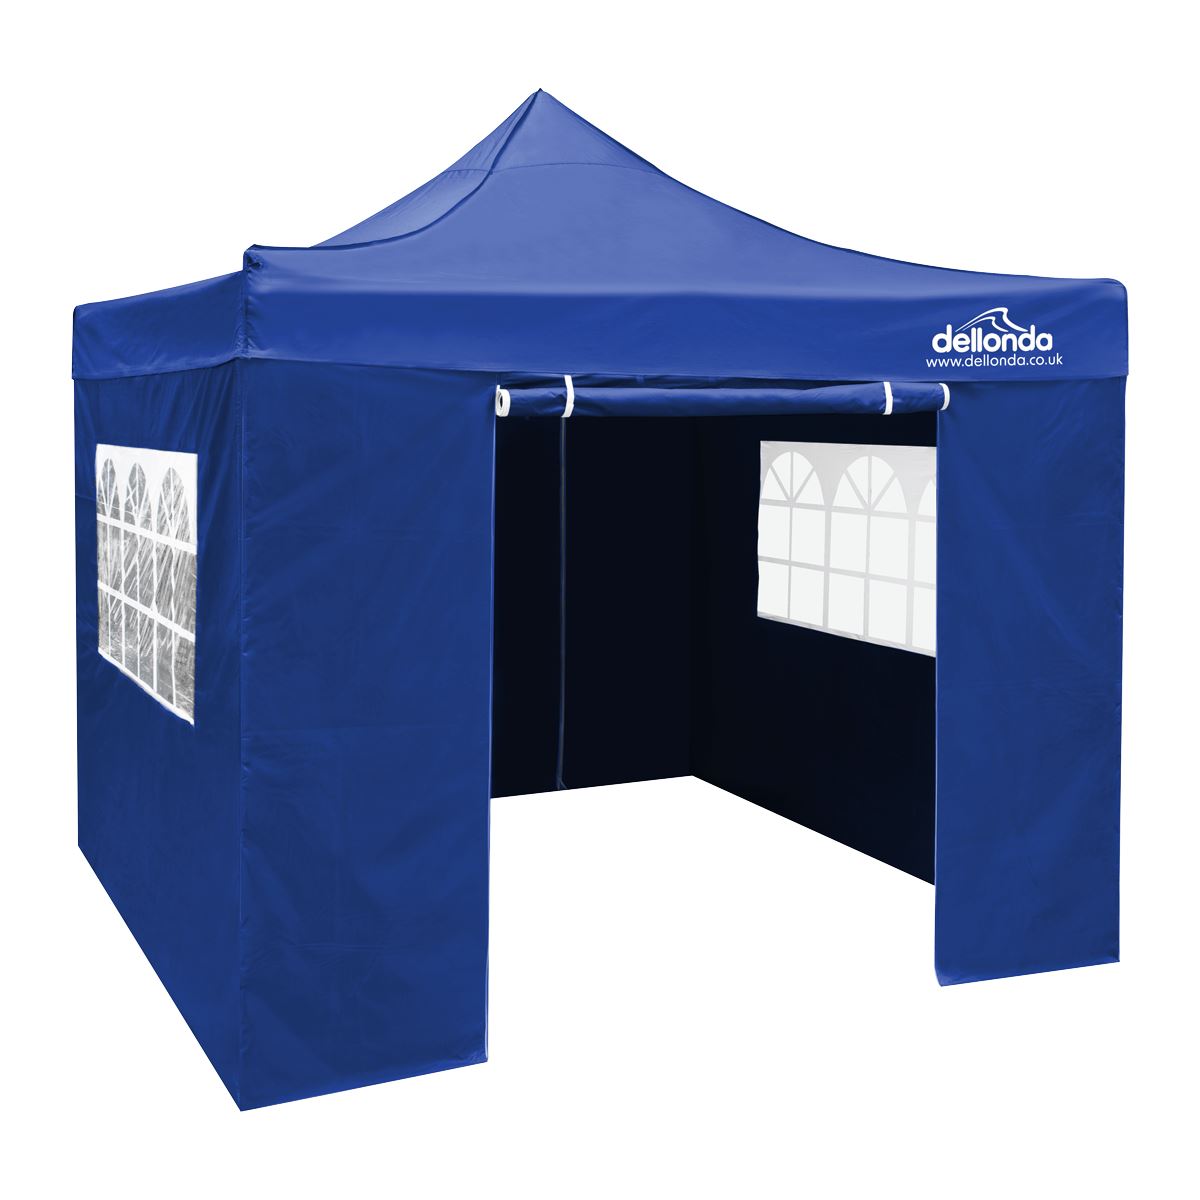 Dellonda Premium 3x3m Pop-Up Gazebo & Side Walls, PVC Coated, Water Resistant Fabric with Carry Bag, Rope, Stakes & Weight Bags - Blue